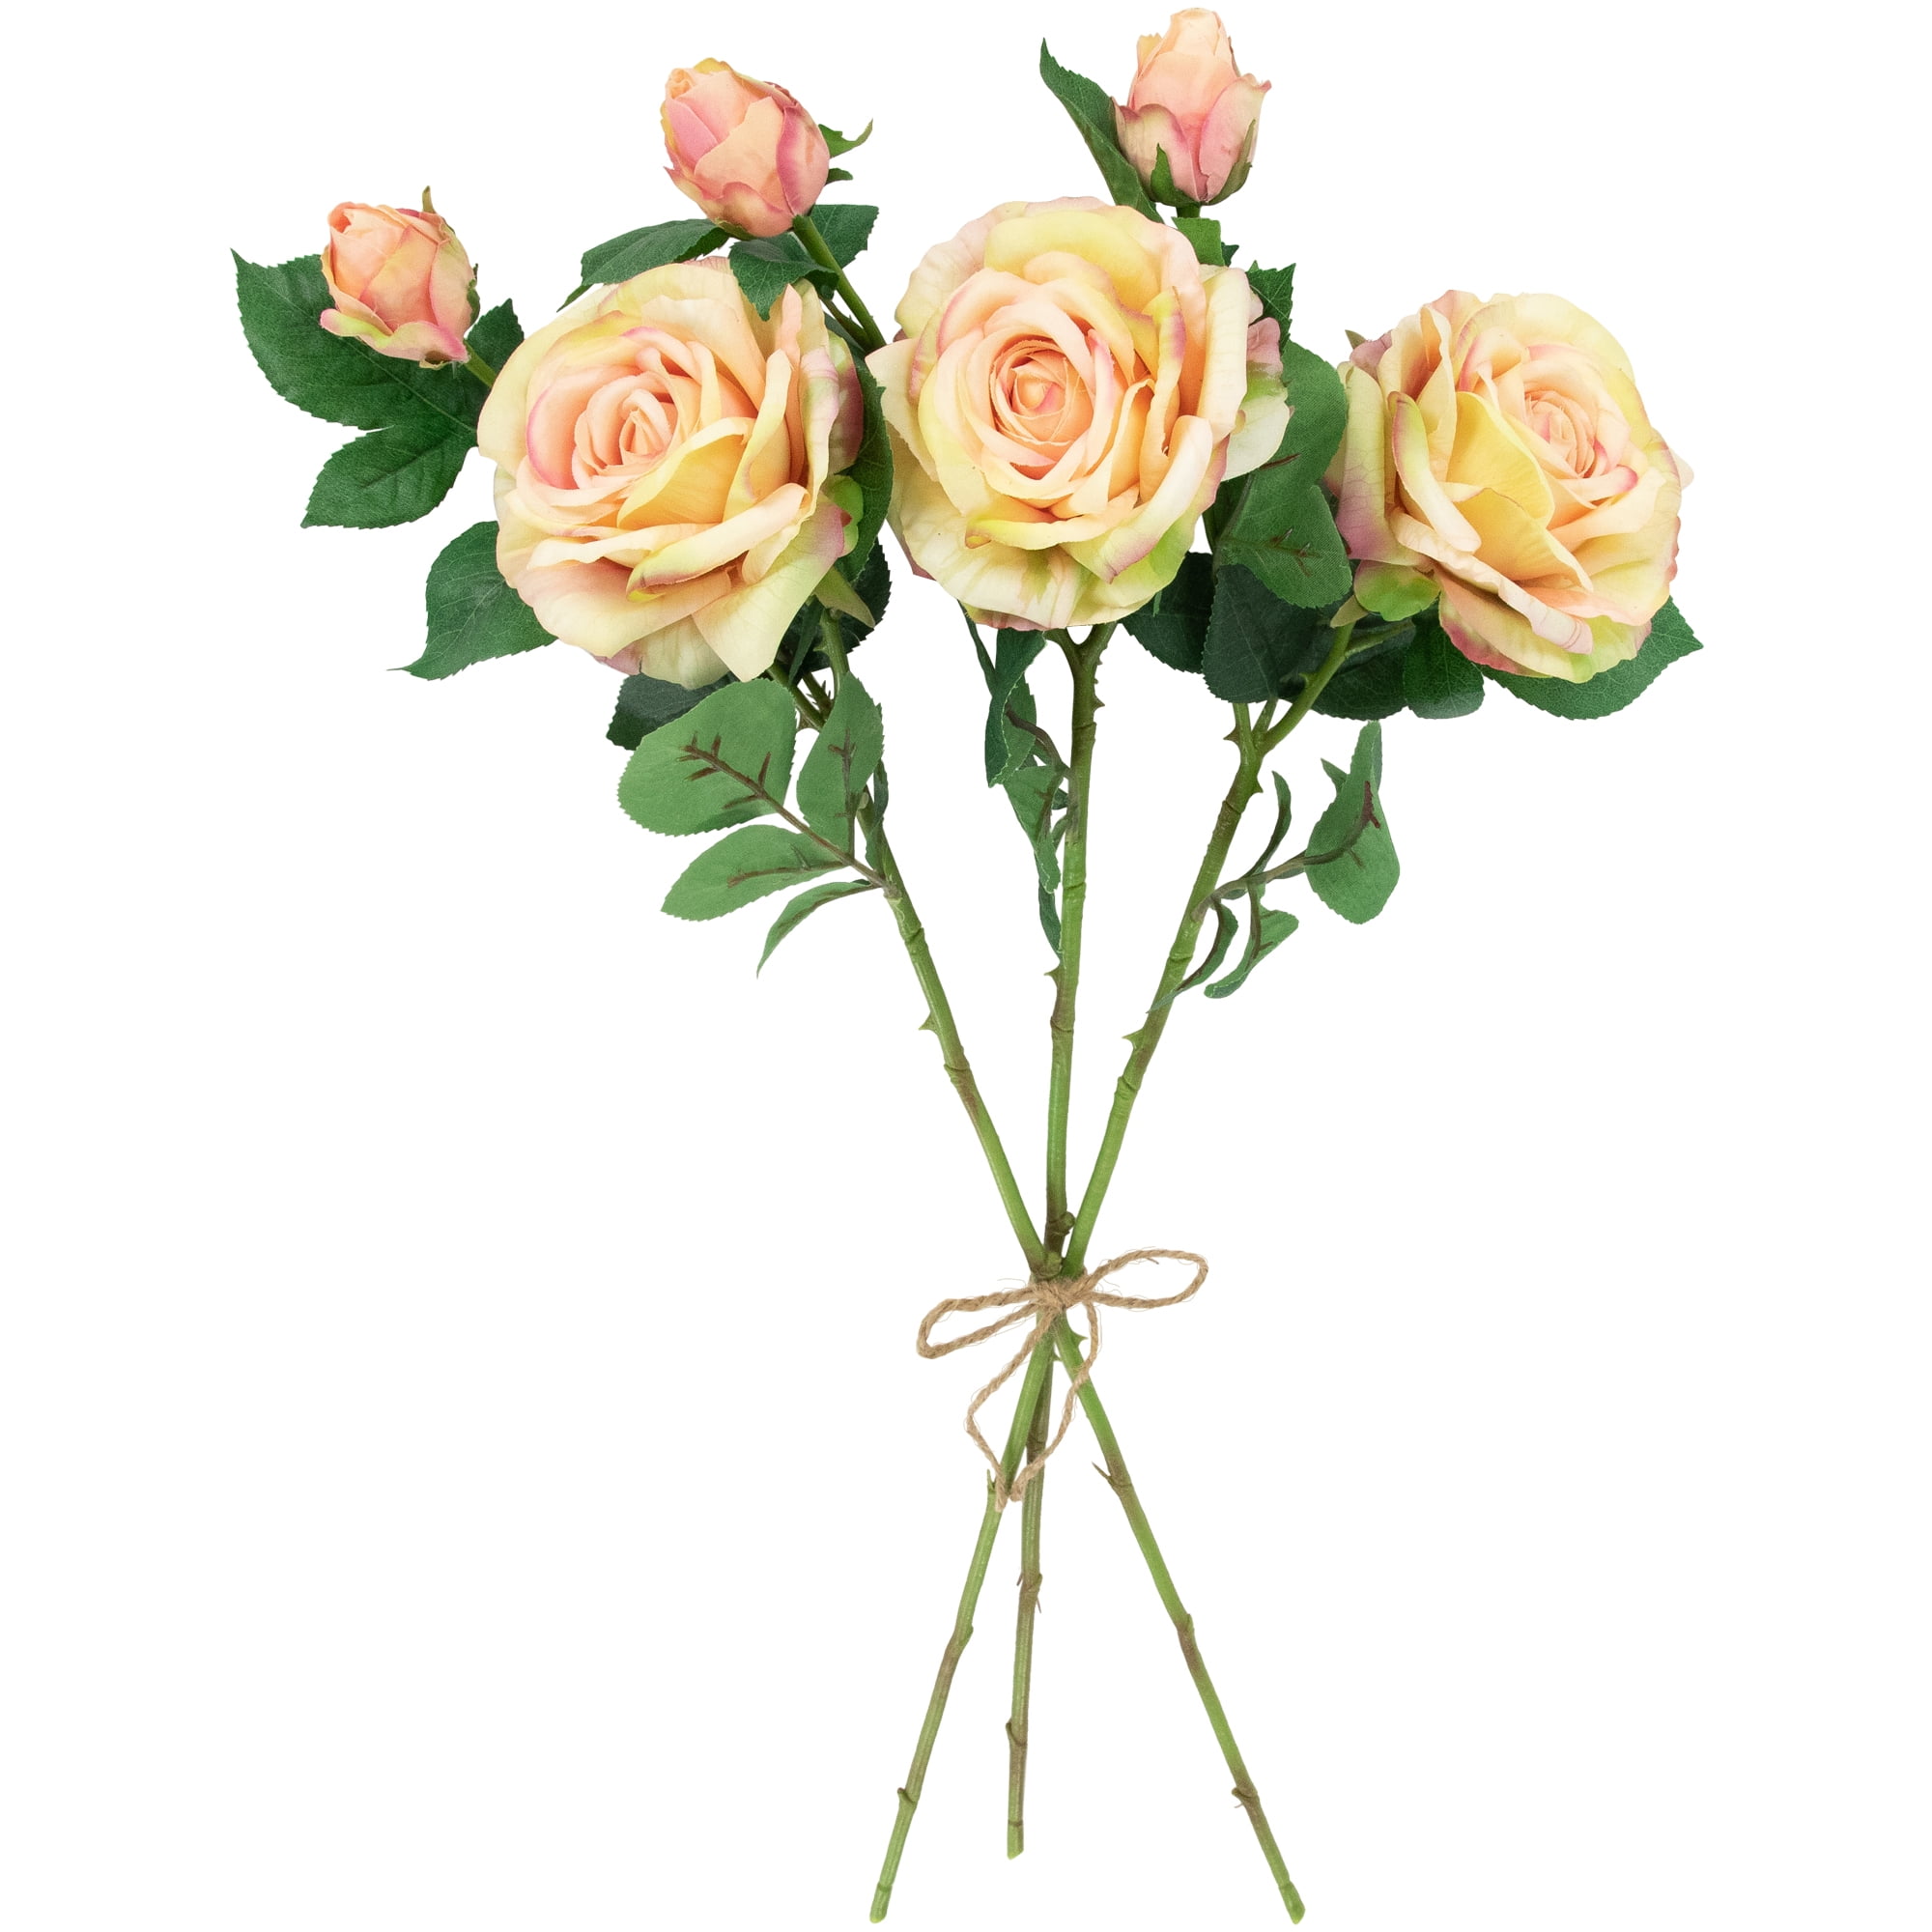 Northlight Real Touch Cream and Pink Artificial Rose Stems, Set of 6 - 26